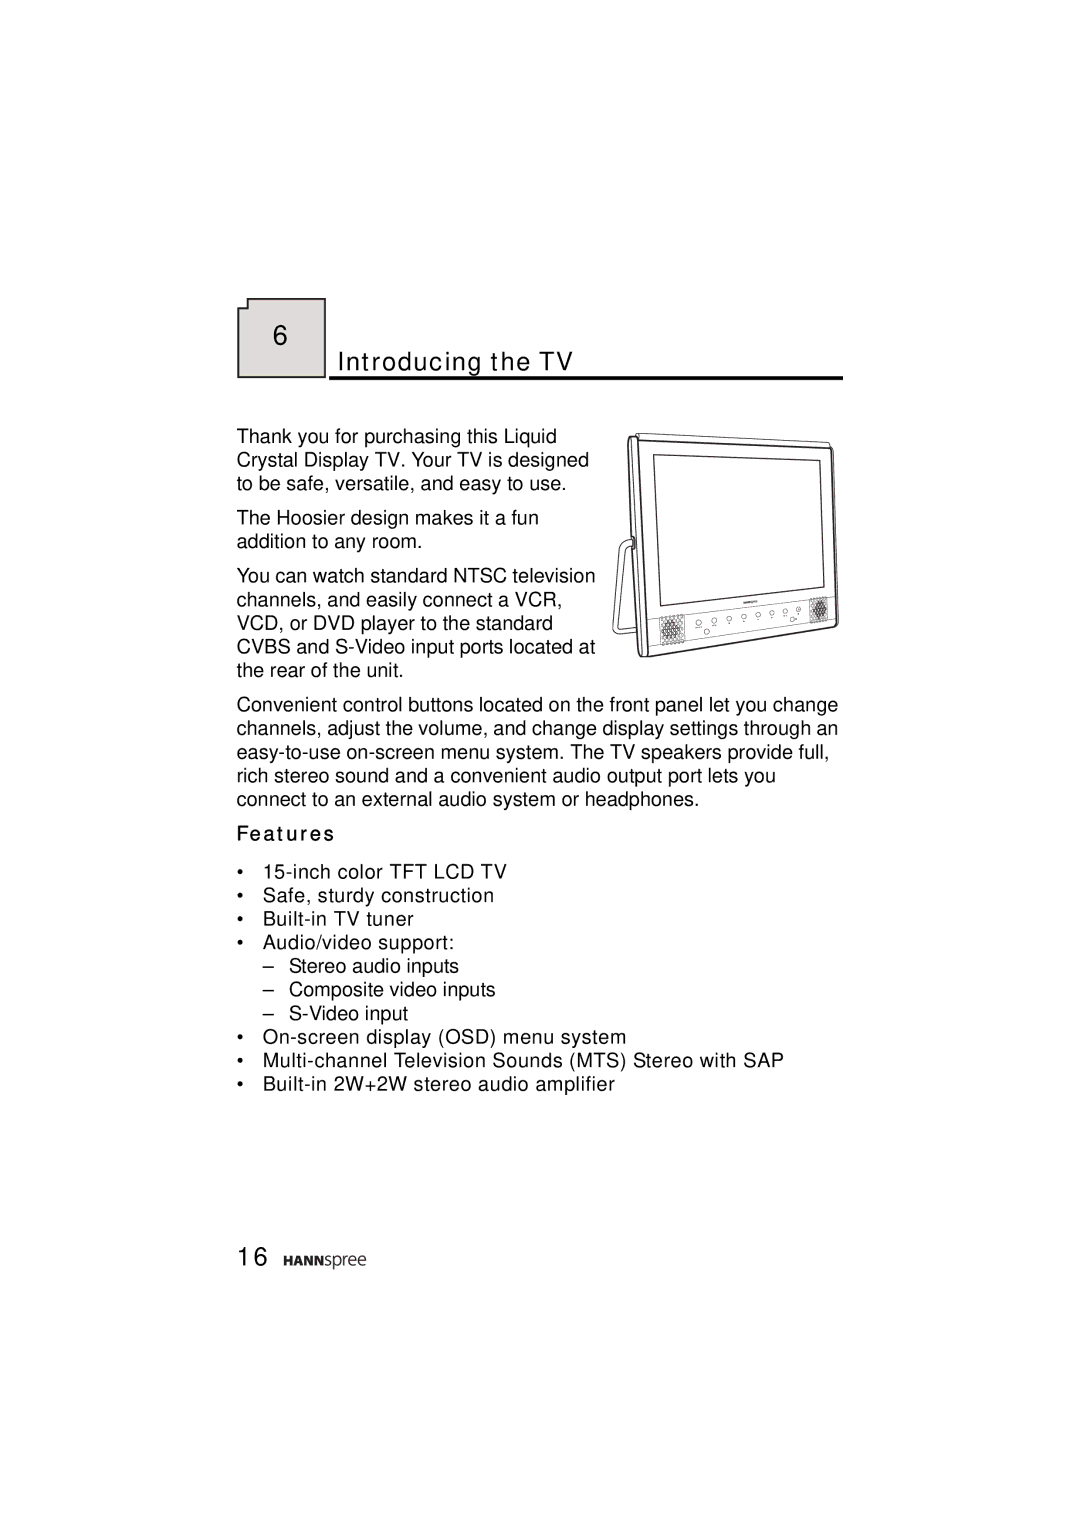 HANNspree ST31-15A1 user manual Introducing the TV, Features 